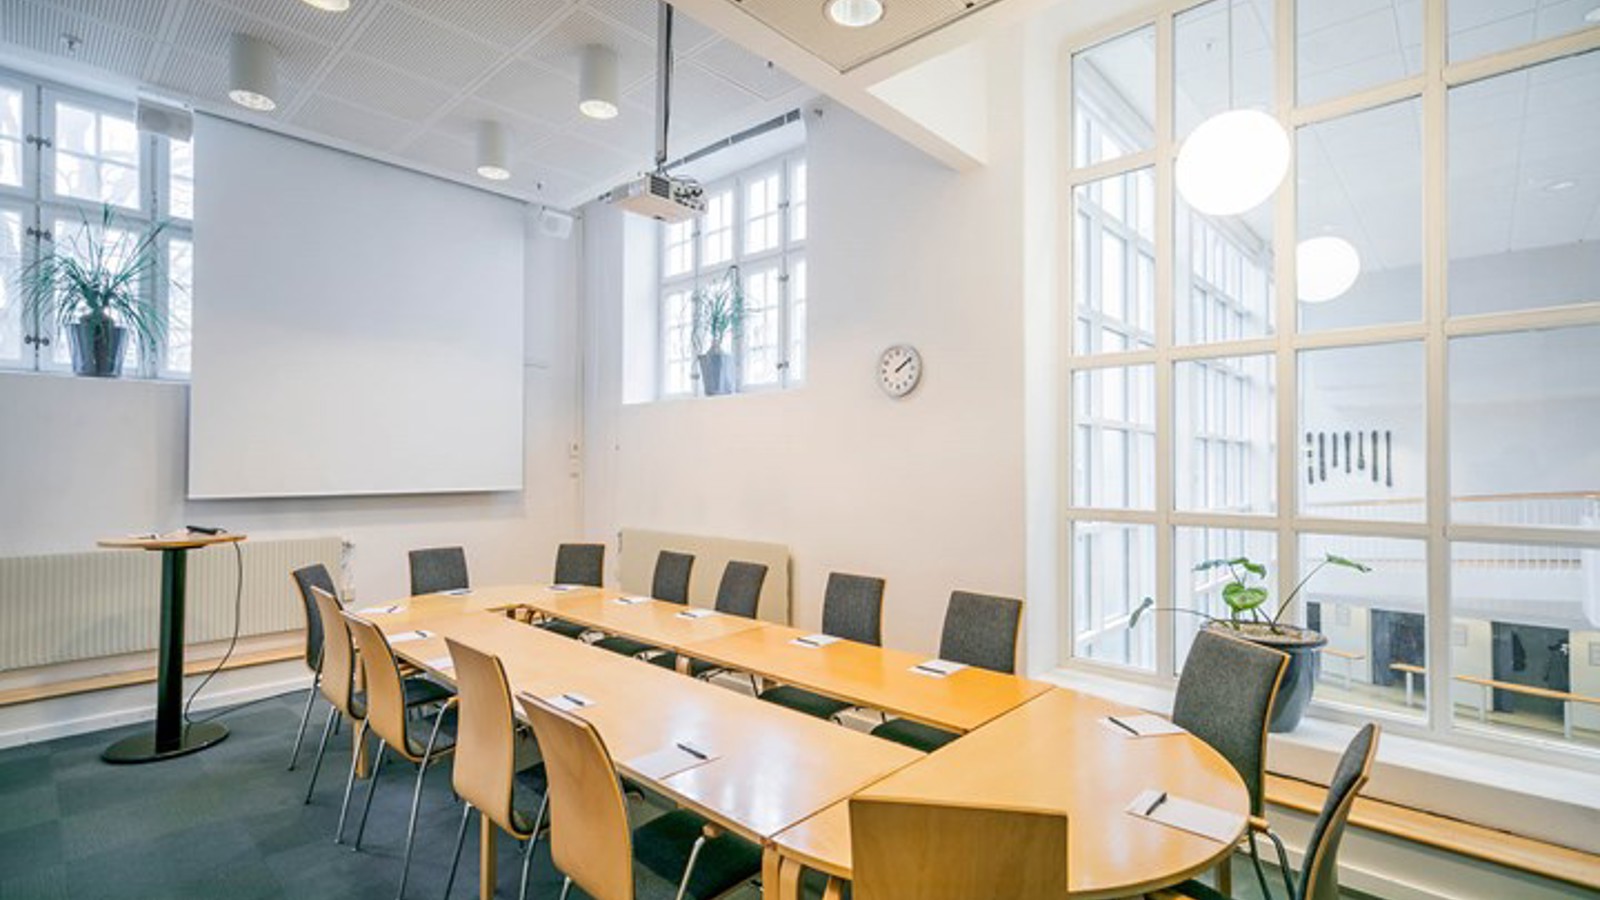 Conference room with board seating, white walls, wooden table and blue carpet